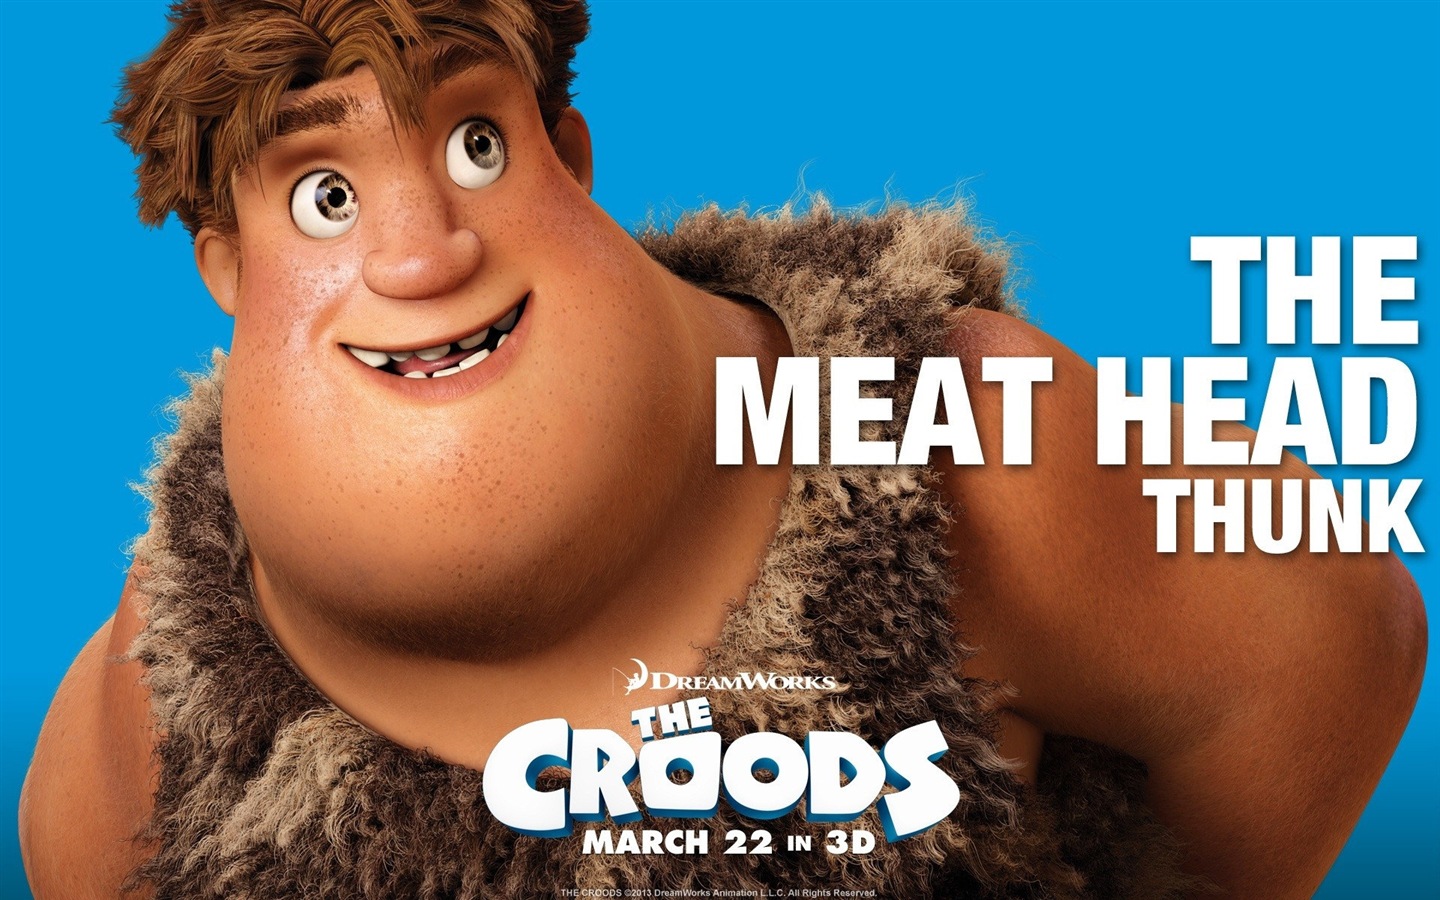 V Croods HD Movie Wallpapers #13 - 1440x900